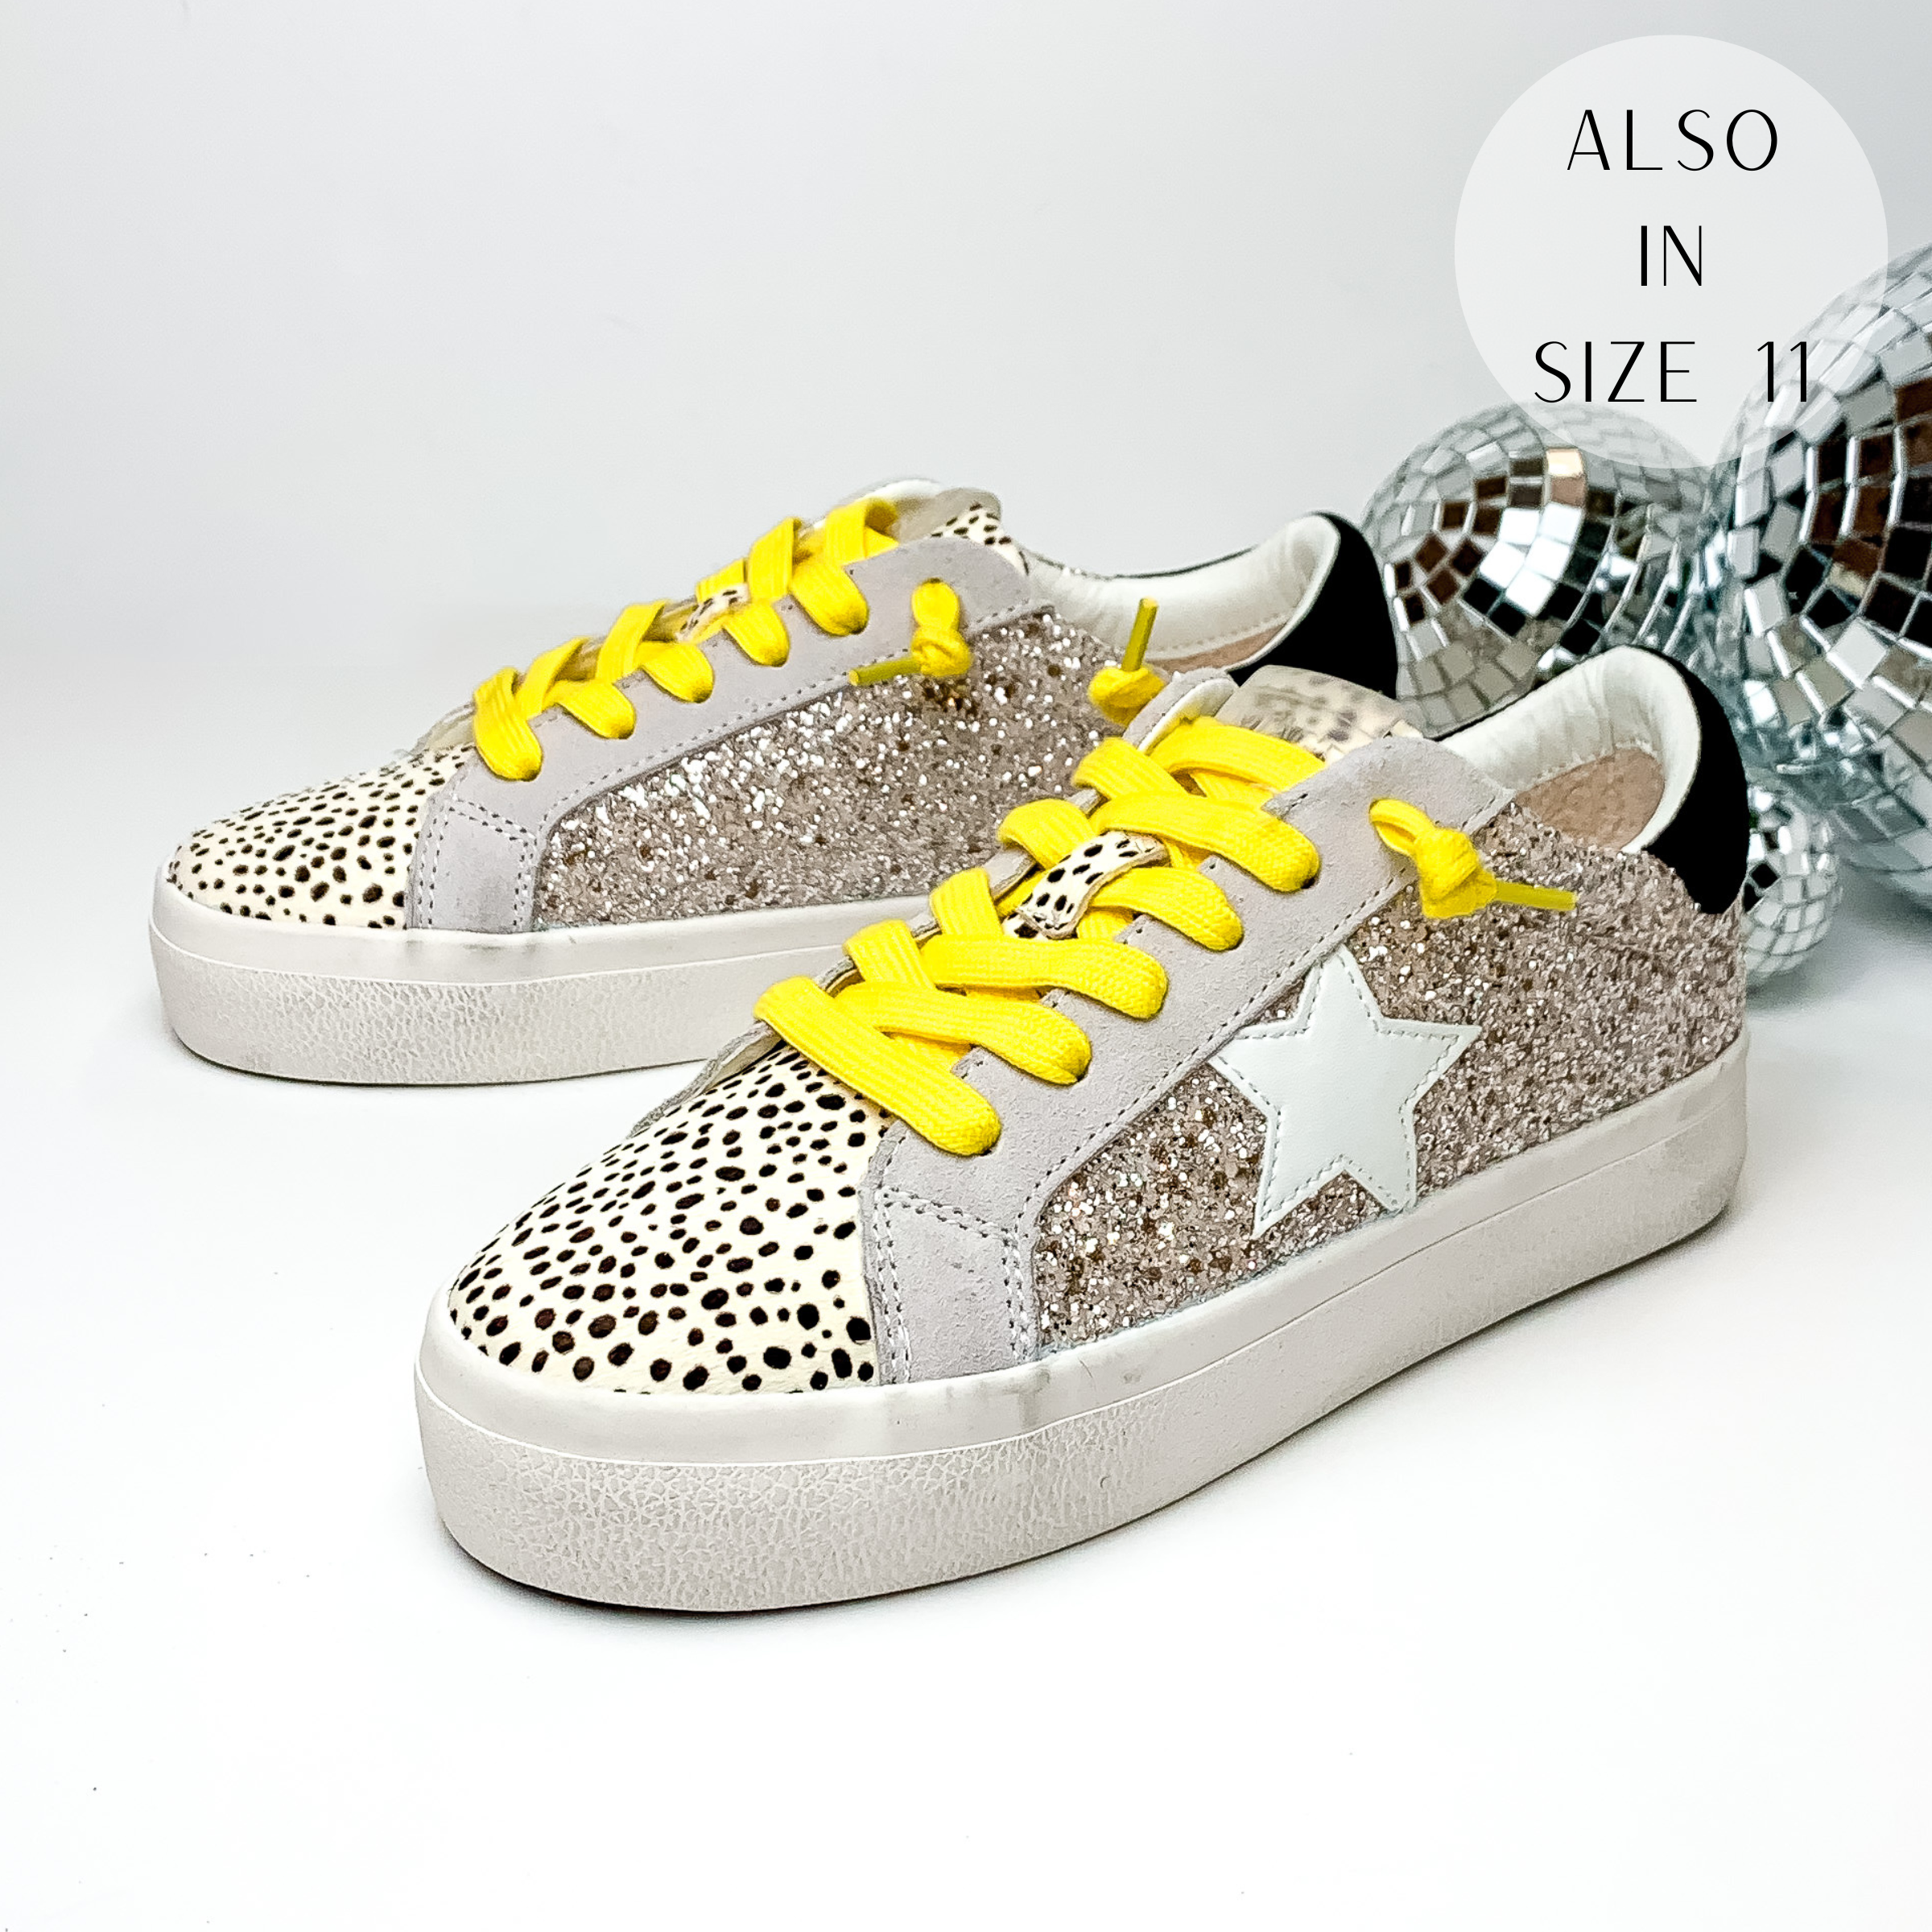 Pictured are tennis shoes with silver glitter on the sides and a cheetah print on the tongue down to the toe. These shoes also include a black patch on the heel, a white star emblem on the side of the shoe, and yellow shoe laces. These shoes are pictured on a white background with disco balls behind them on the right hand side.